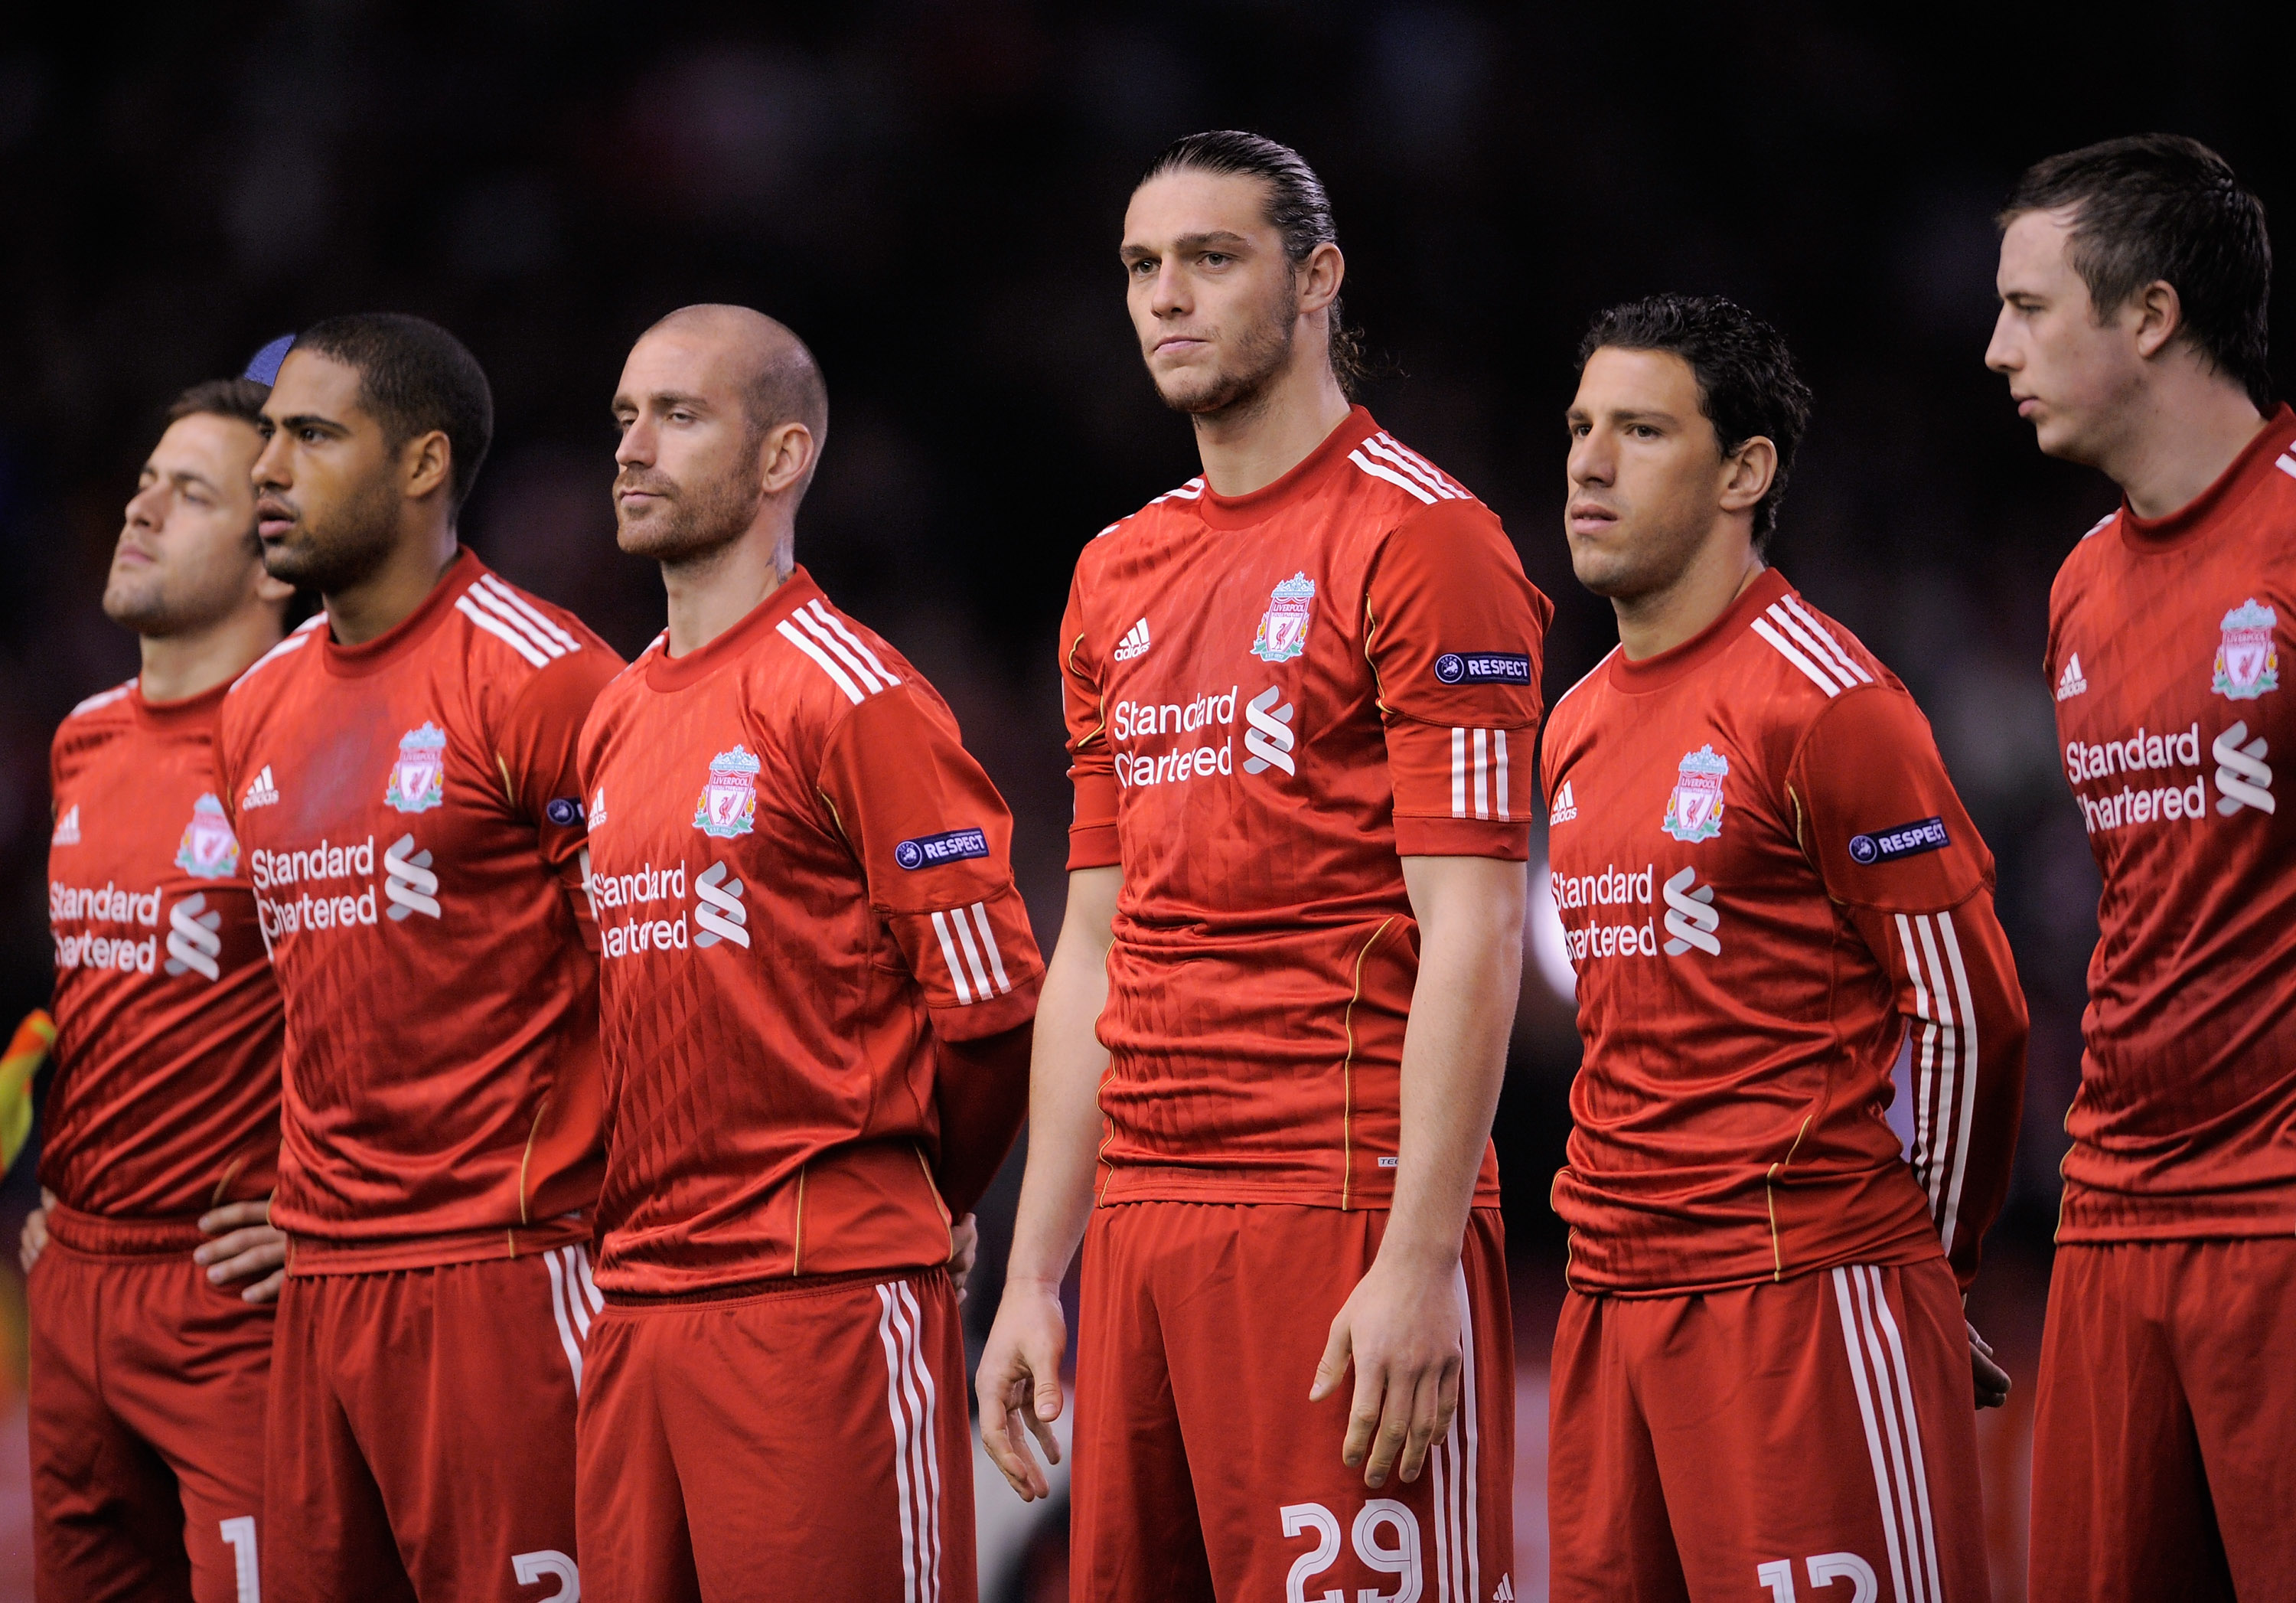 LIVERPOOL, ENGLAND - MARCH 17:  Andy Carroll of Liverpool (C) lines up with his team mates ahead of  the UEFA Europa League Round of 16 second leg match between Liverpool and SC Braga at Anfield on March 17, 2011 in Liverpool, England.  (Photo by Michael